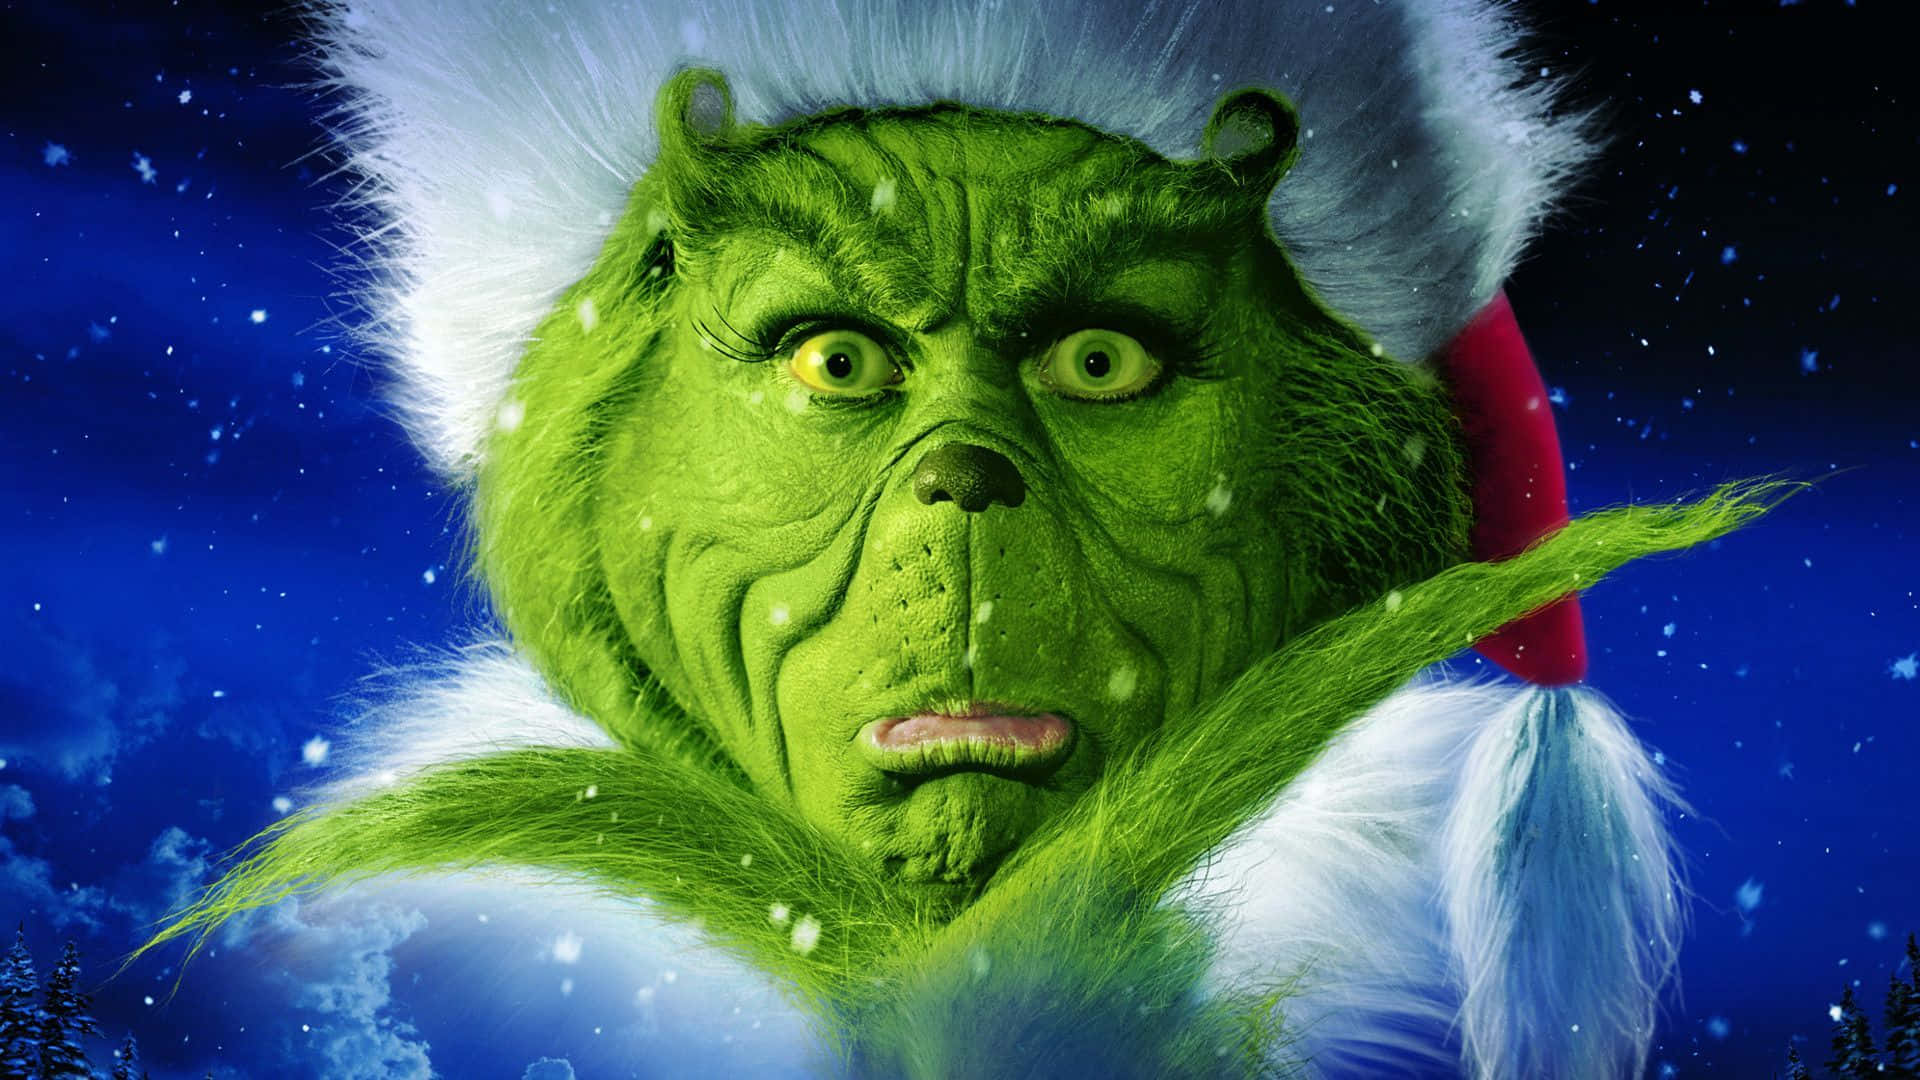 Get Into The Christmas Spirit With The Grinch!